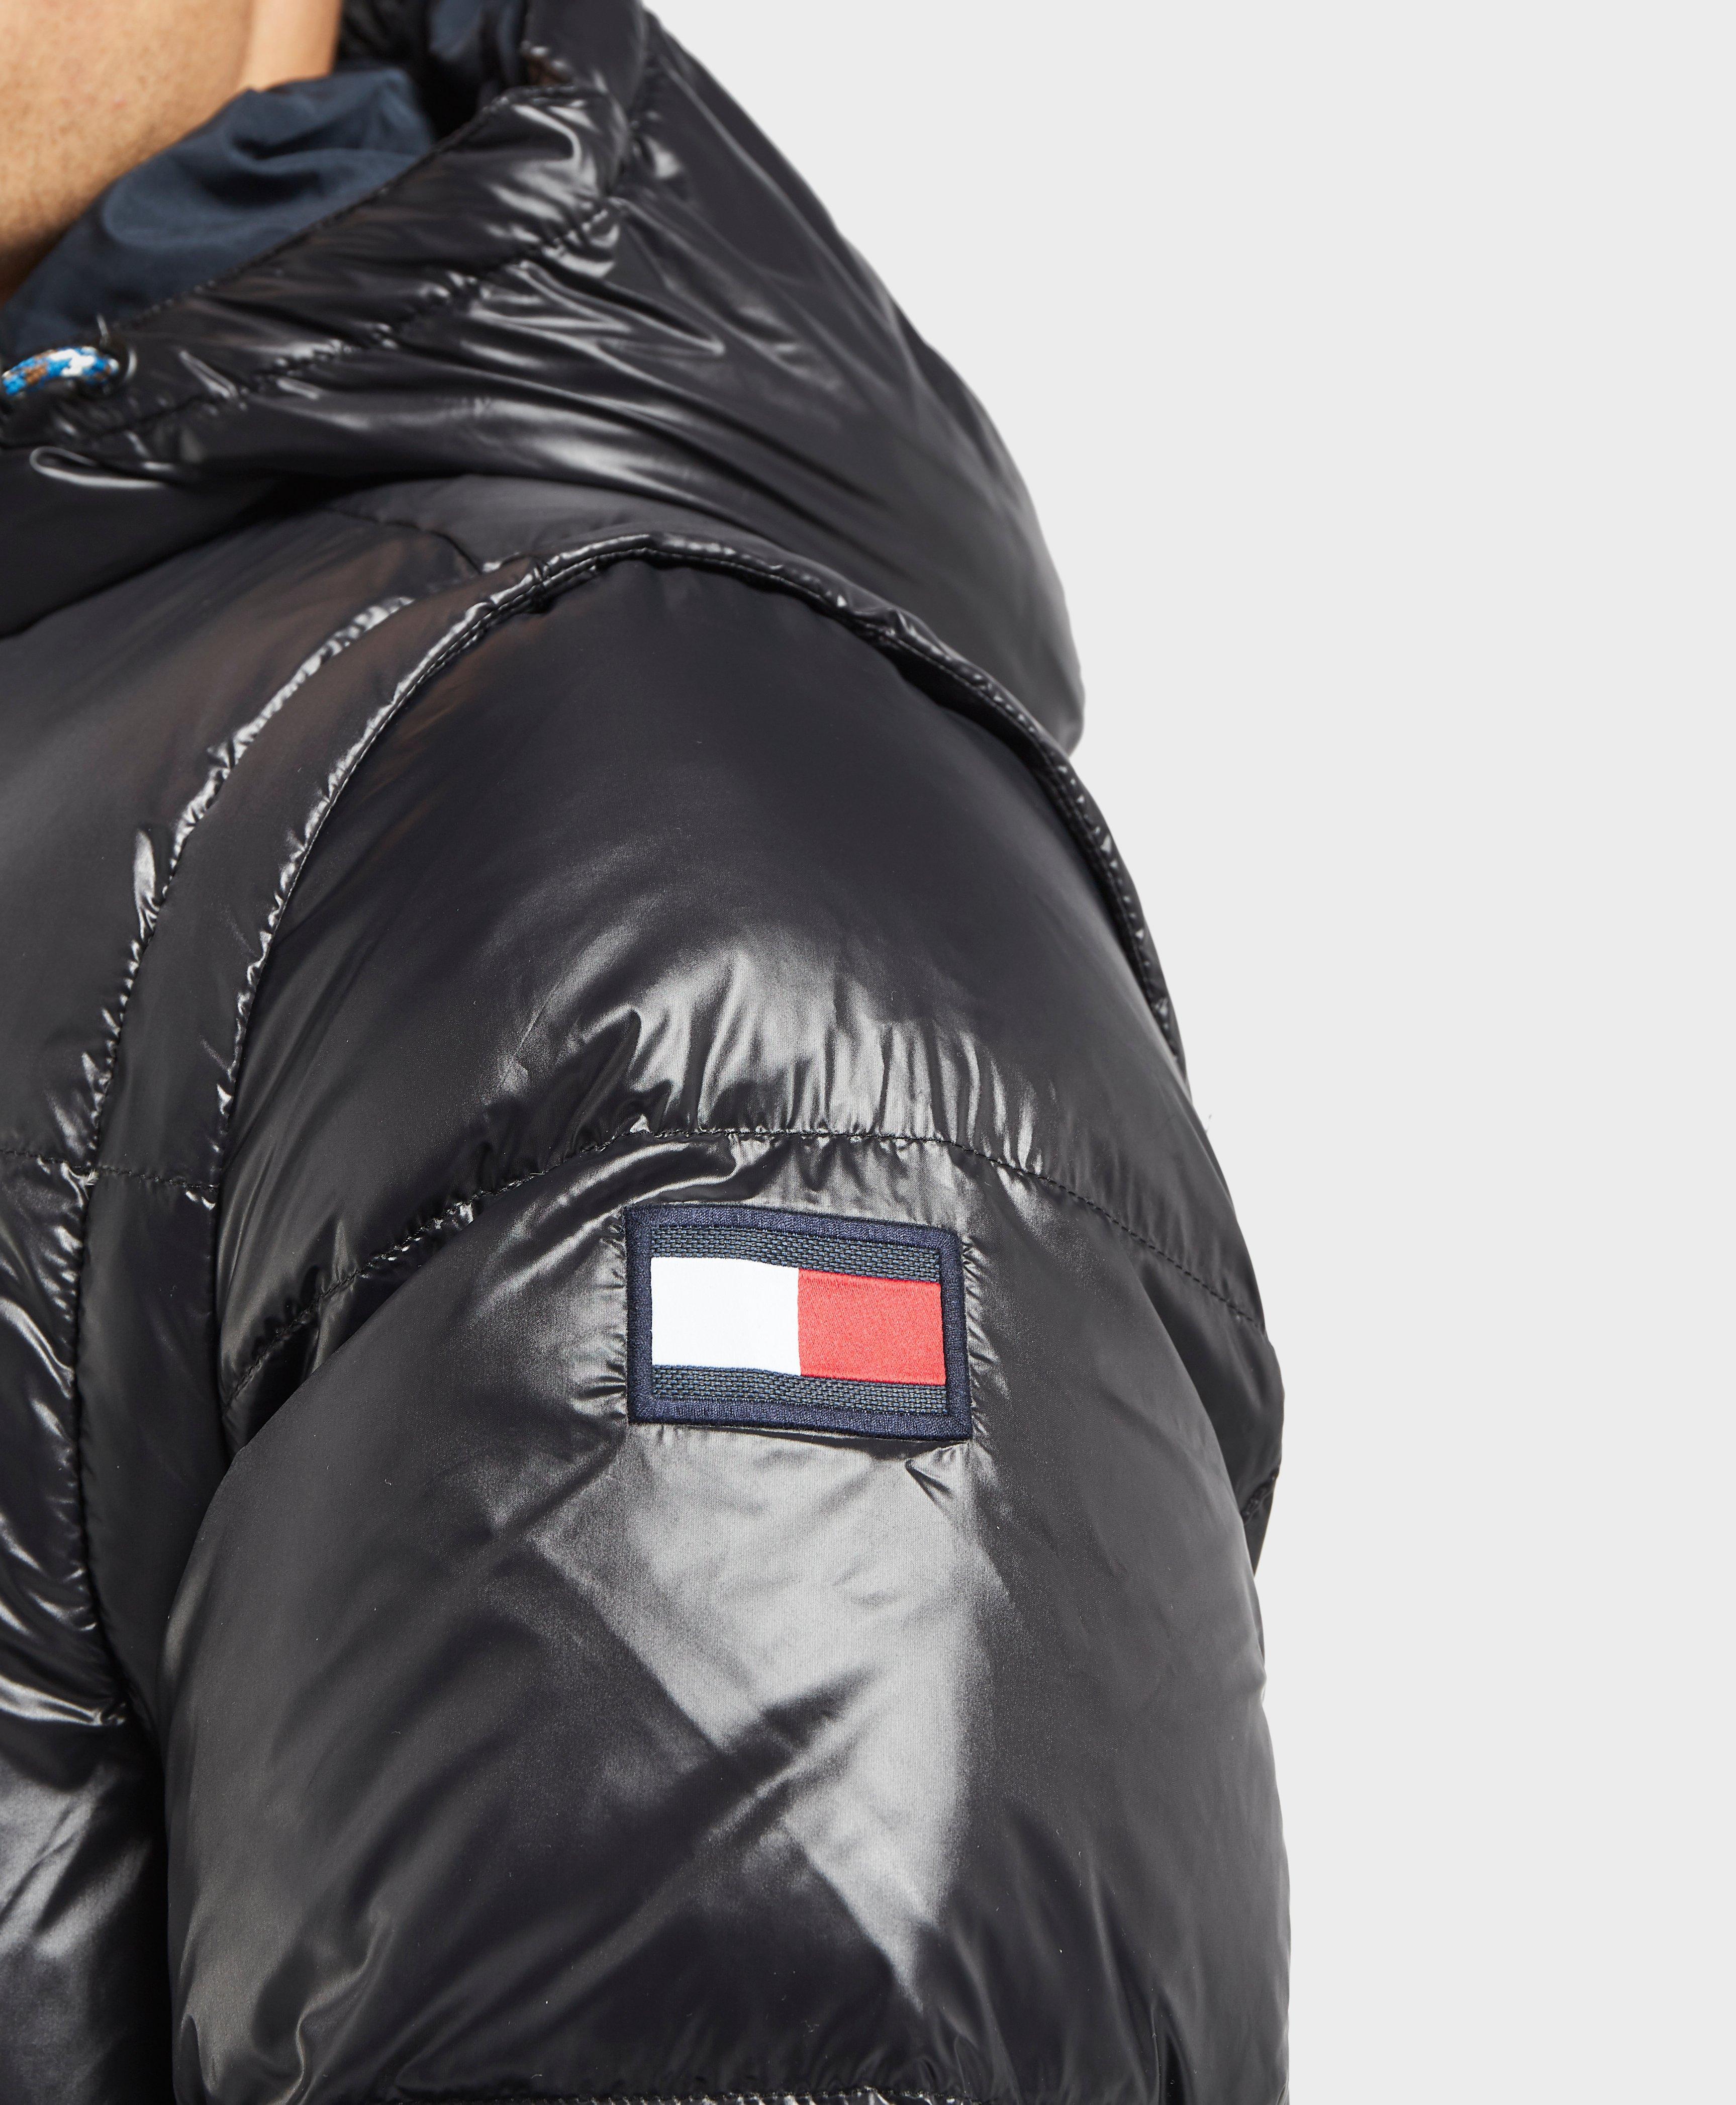 Tommy Hilfiger Synthetic Shiny Down Jacket in Black for Men - Lyst